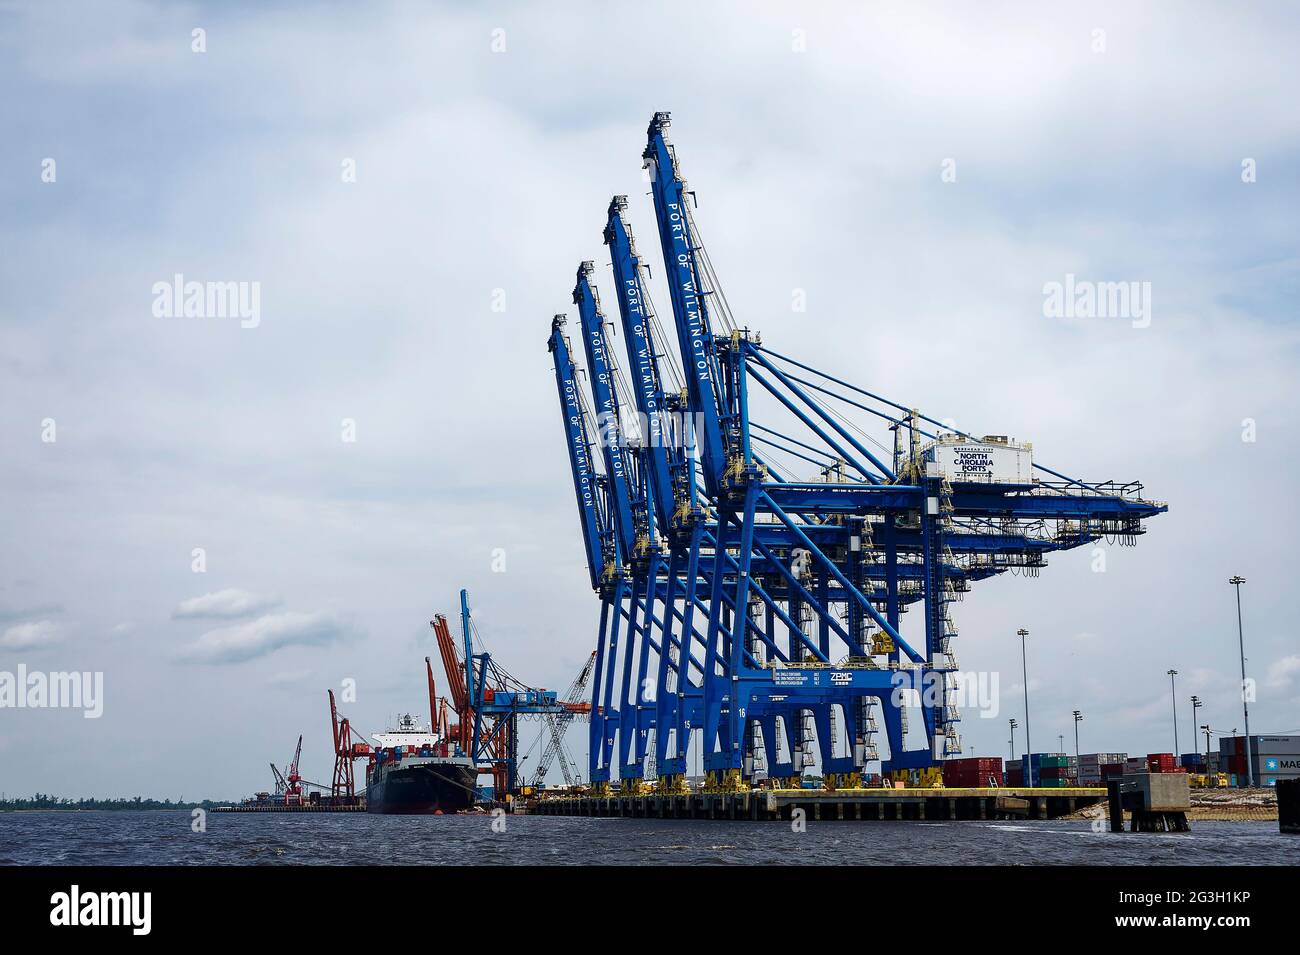 industrial port scene, large cargo ship docked; containers; bulk carrier, transportation; industry, marine, business, freight transport, water, crane Stock Photo